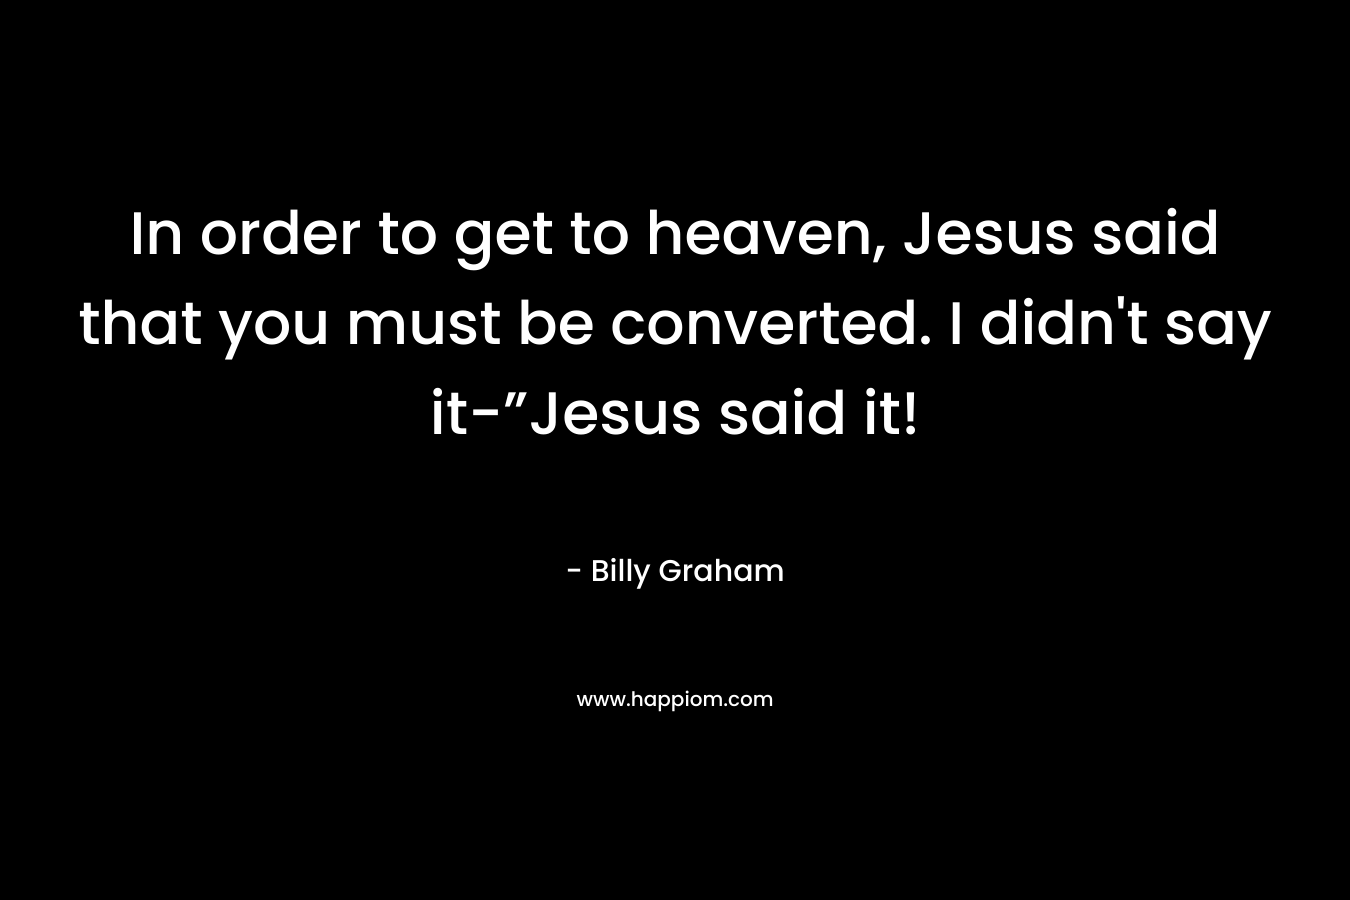 In order to get to heaven, Jesus said that you must be converted. I didn’t say it-”Jesus said it! – Billy Graham